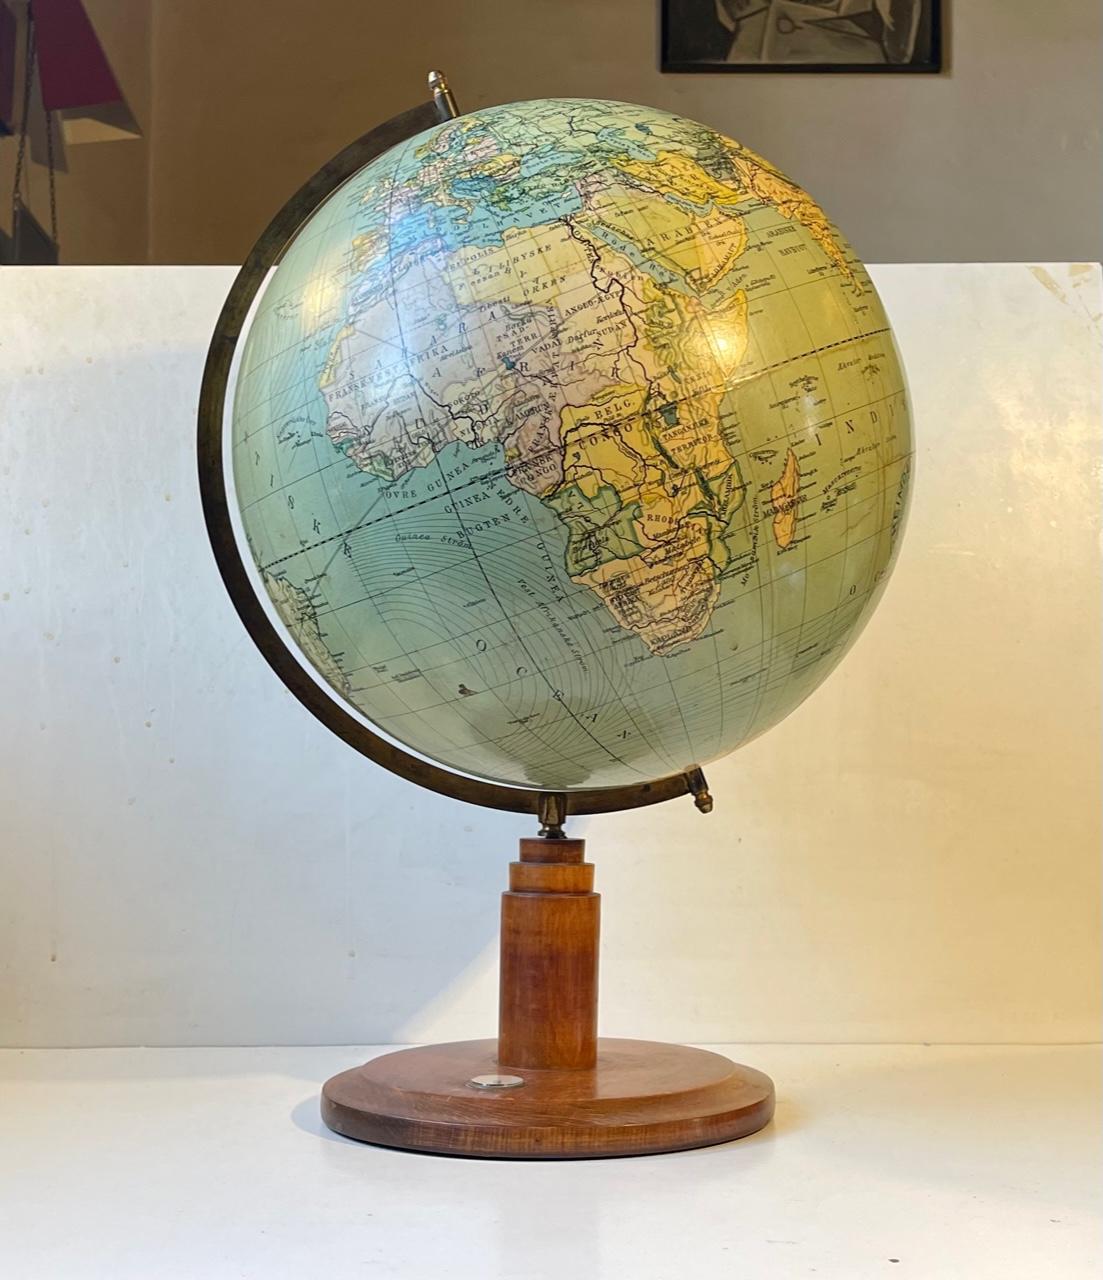 A rare surviver in shape of this 90 years old Globus. Its made from paper-covered bakelite suspended in a numbered brass frame on an Art Deco/architectural stylized wooden base with built-in compass. This is No. 34 and its scale is 1:38.000.000. It